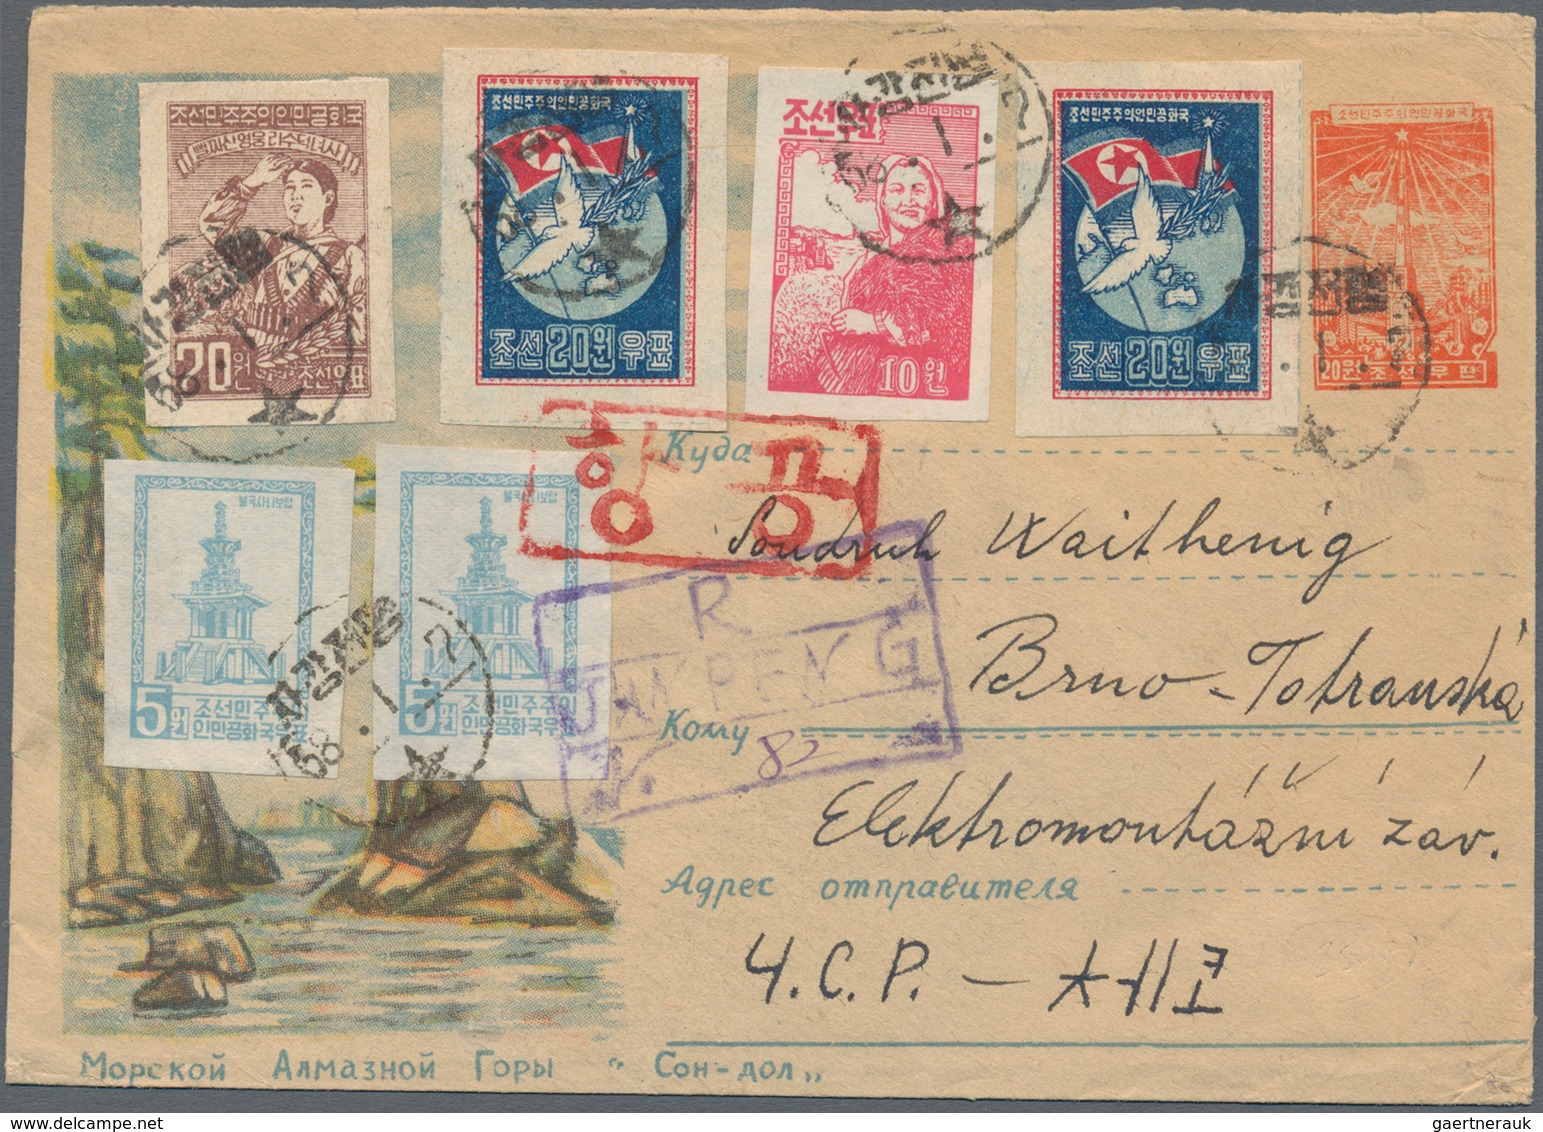 Korea-Nord: 1956, Illustrated Stationery Envelope 20 W. Monument Uprated 7 Stamps Total 135 W. Canc. - Korea, North